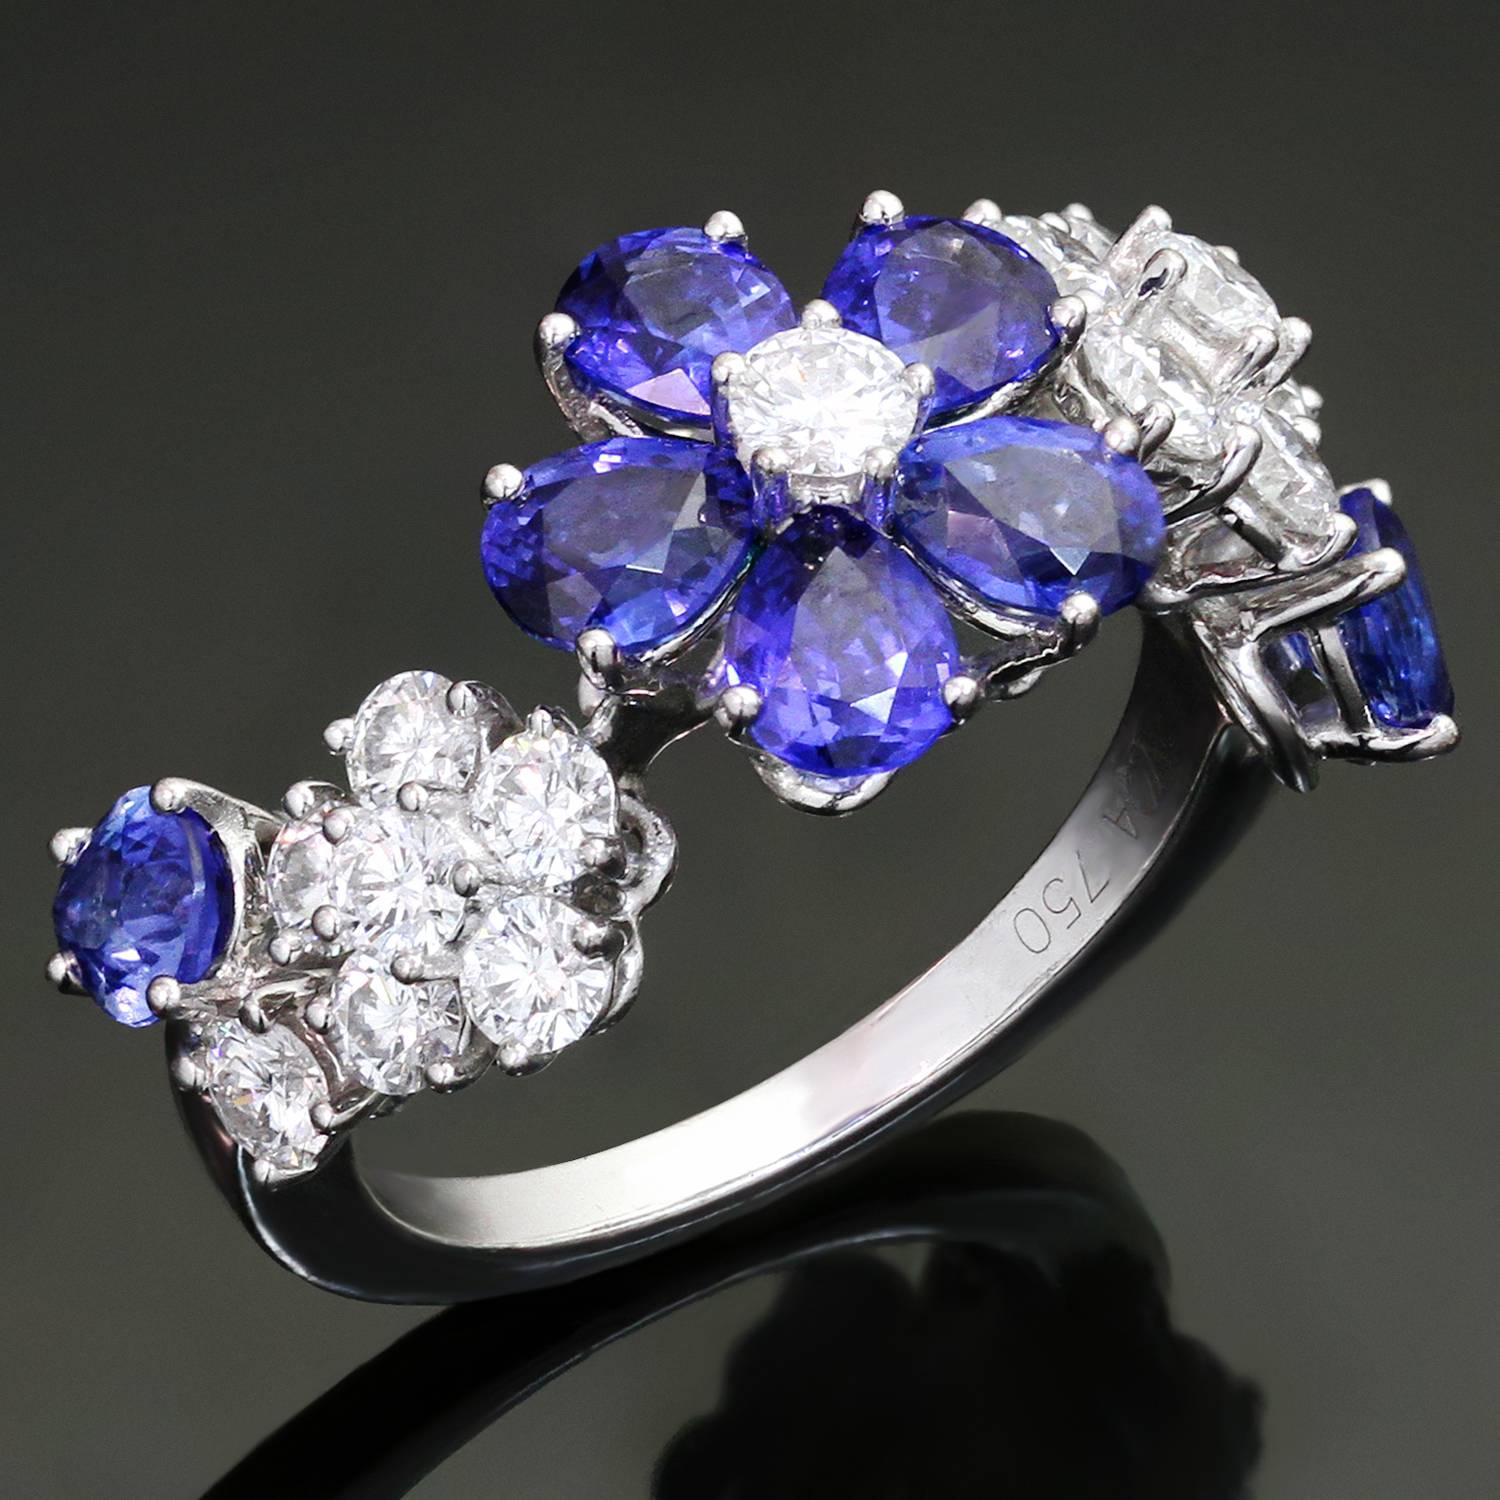 Celebrate the beauty of wildflowers with this fabulous ring from the elegant Folie des Prés High Jewelry collection by Van Cleef & Arpels. The ring is crafted in 18k white gold and set with 7 blue sapphires of an estimated 2.71 carats and 15